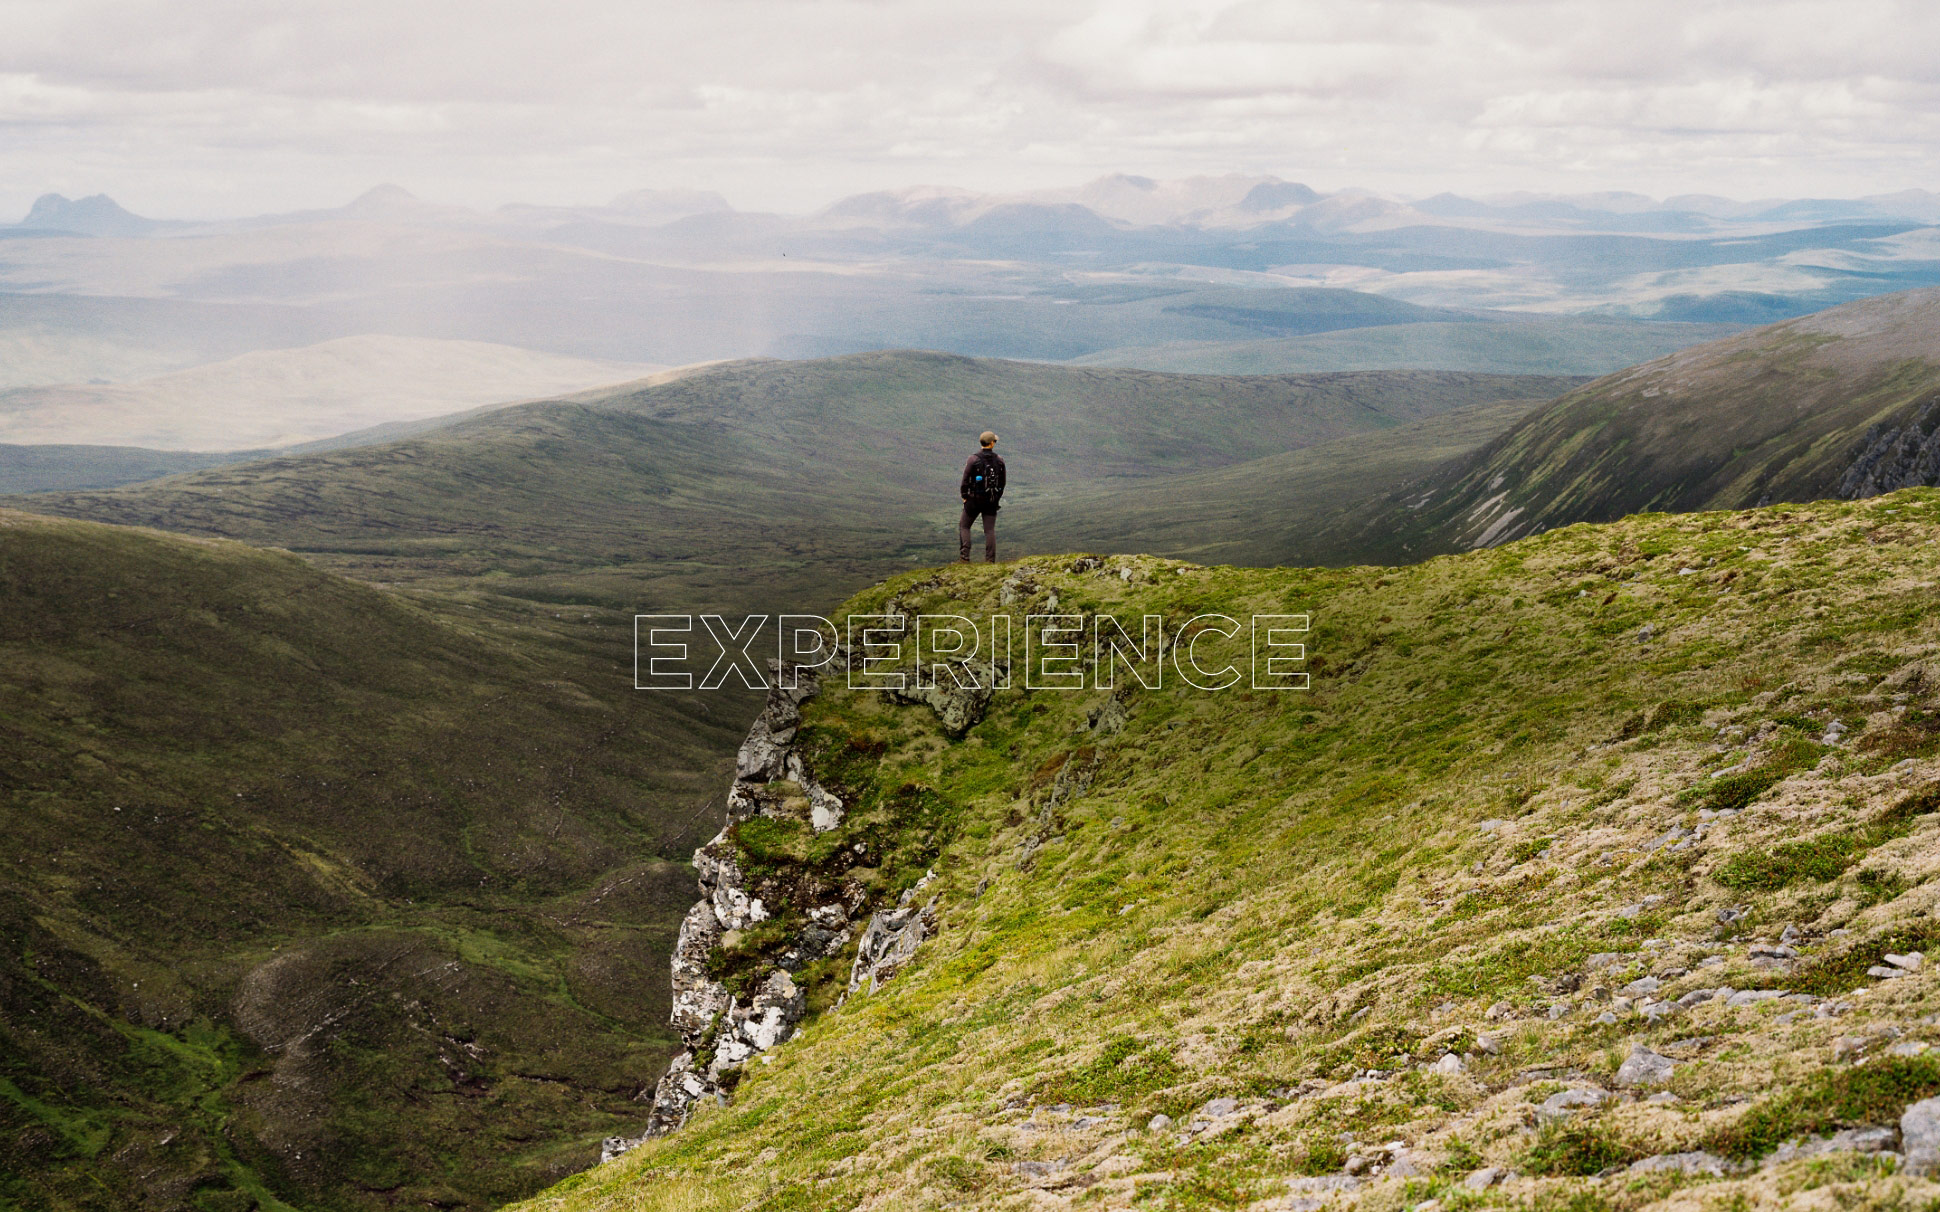 Young adventurer standing at the top of a mountain, overlooking the landscape.